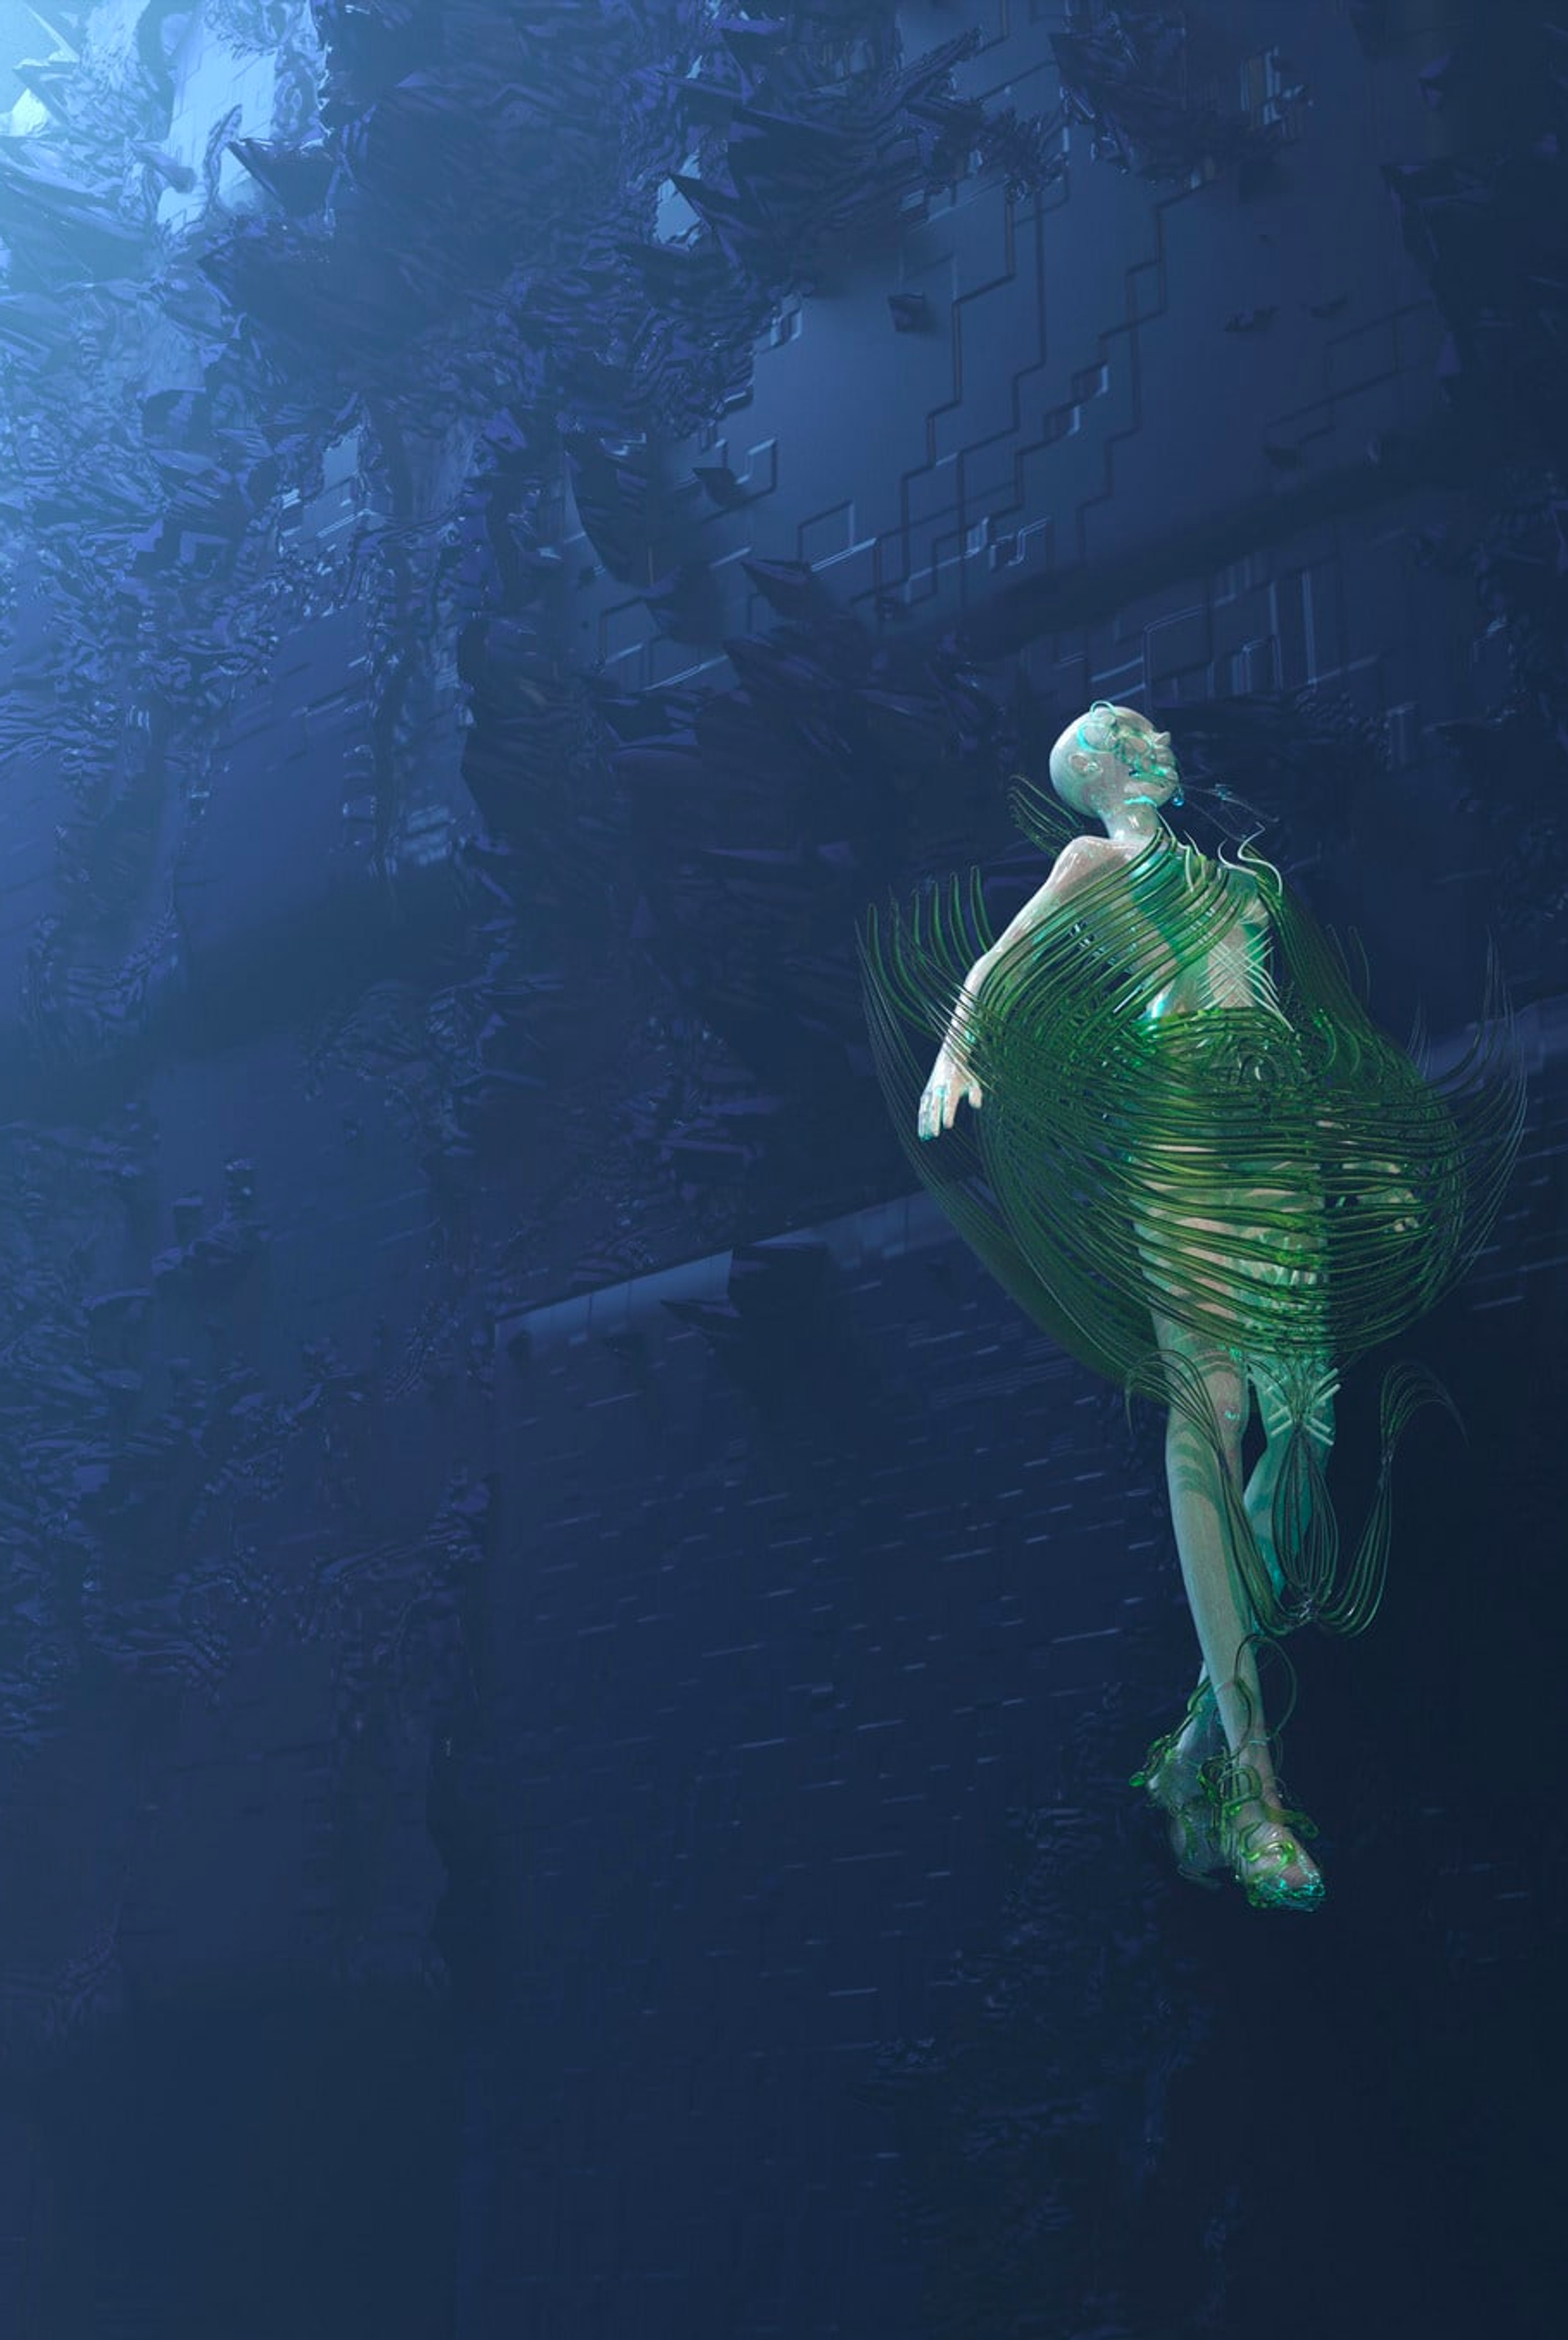  An image of a hairless, all-white female figure, wrapped in a green net of long strands and floating in what looks like deep ocean, next to a large, crumbling deep blue structure, by Peiyi Liang.